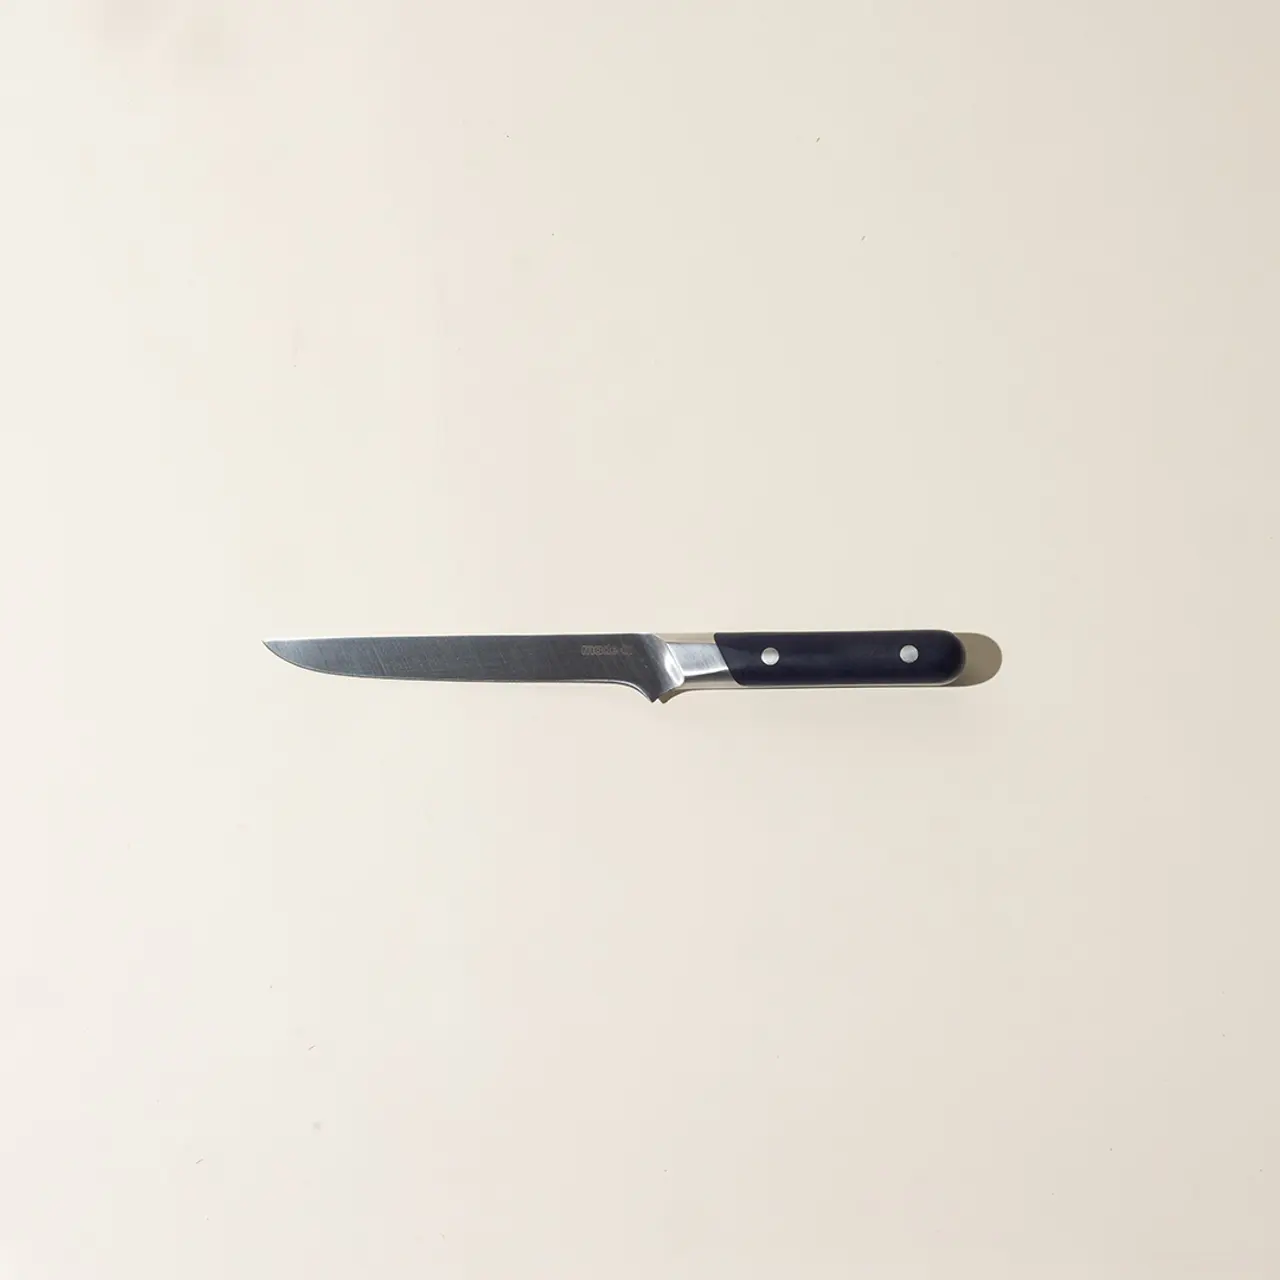 A kitchen knife with a black handle lies centered on a plain beige background.